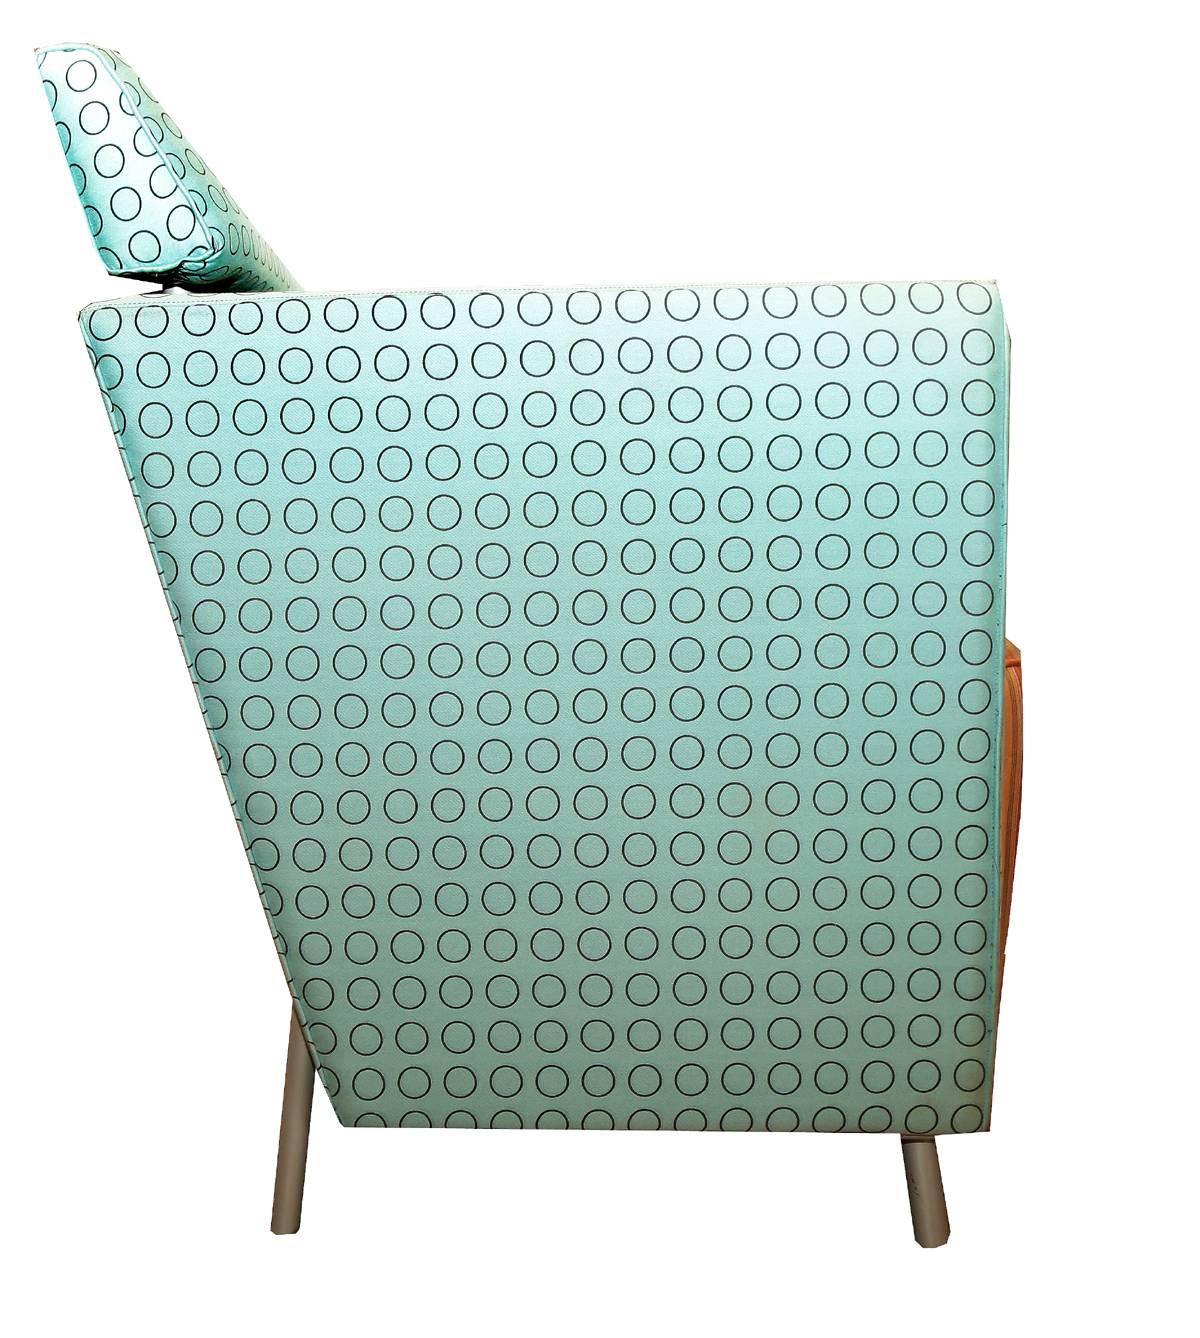 American Midcentury Upholstered Chair